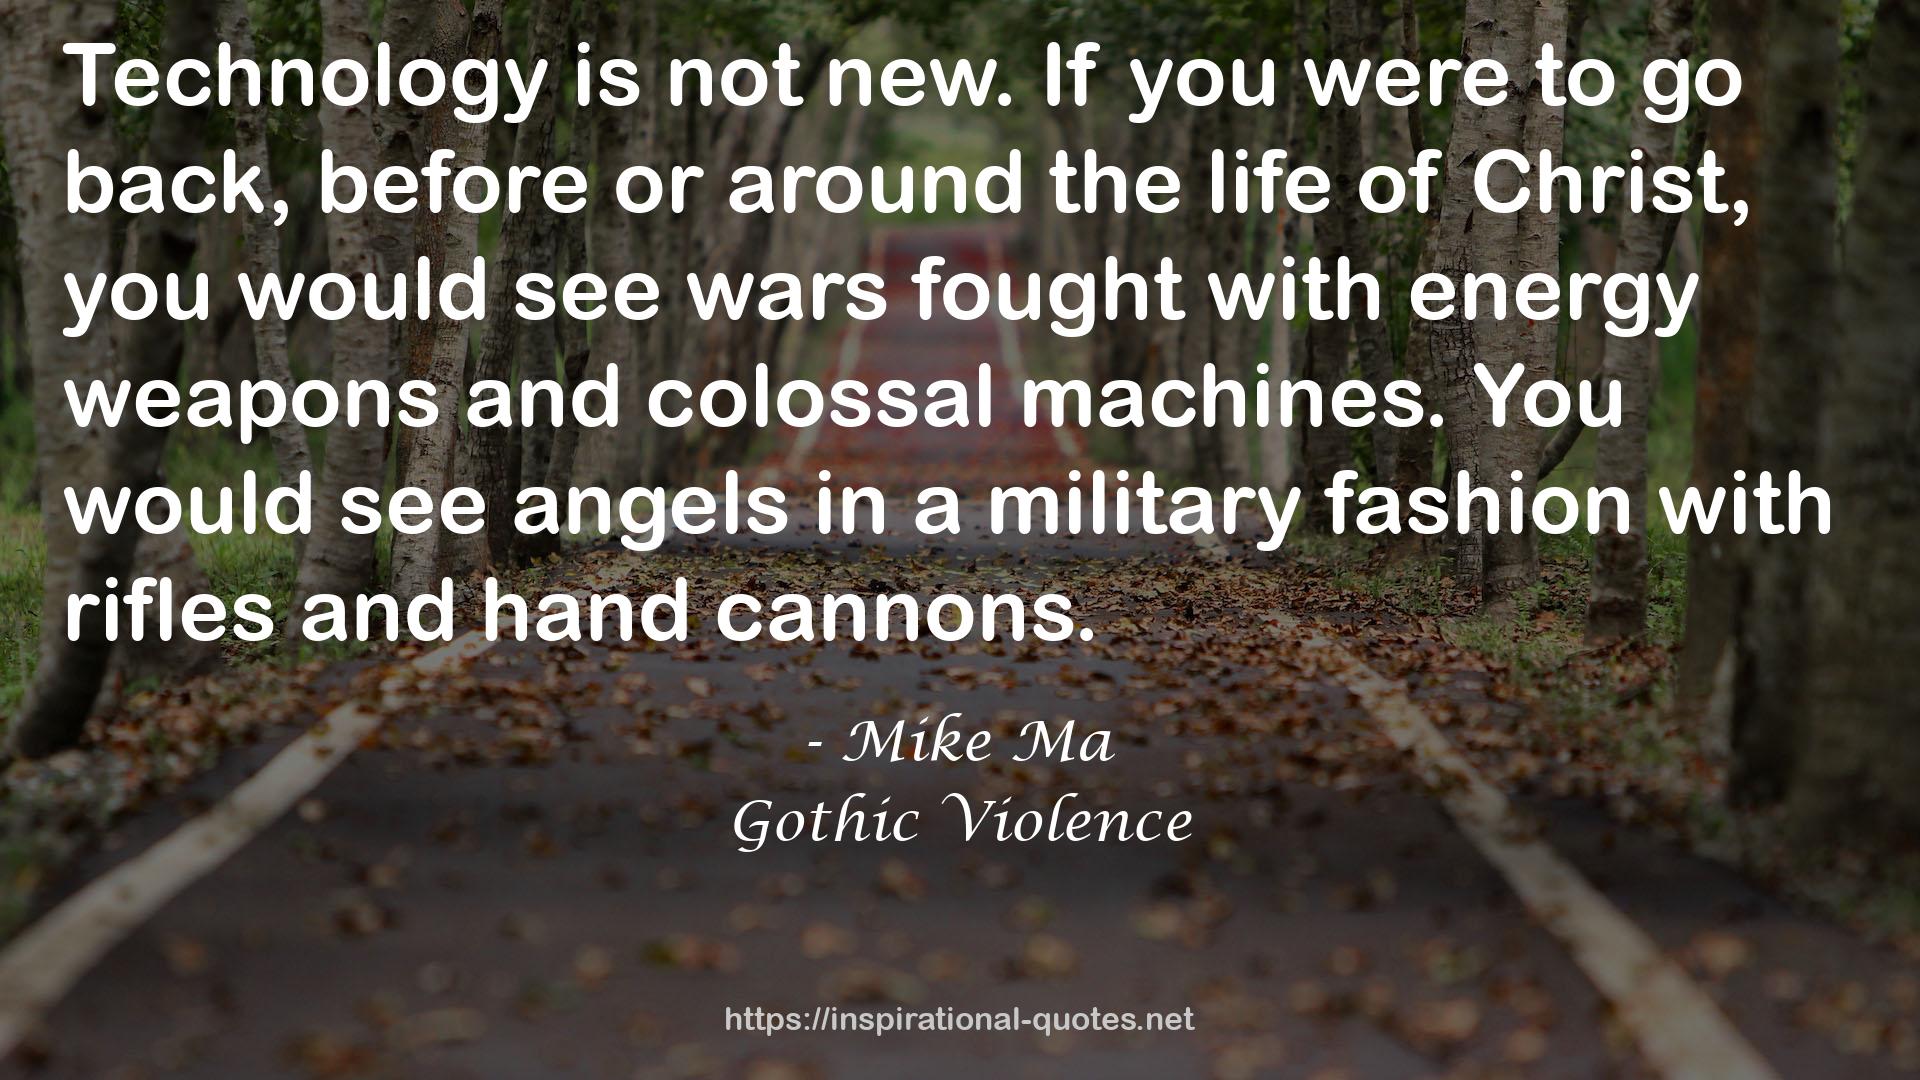 Gothic Violence QUOTES